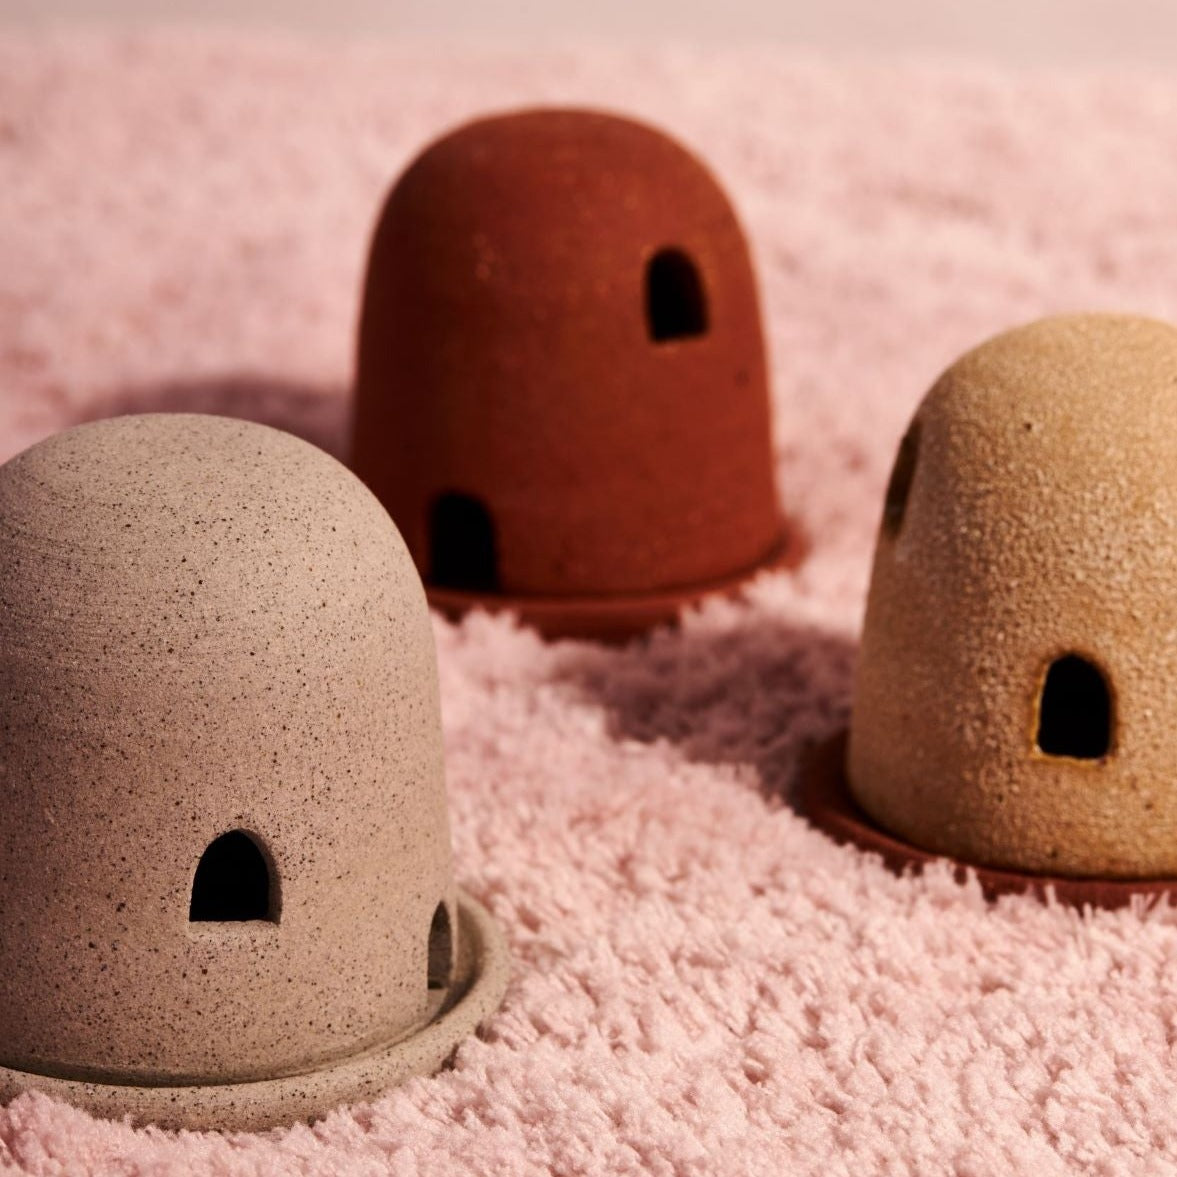 Three dome burners in grey, terracotta, and rust lava, sit on fluffy pink fabric. The dome burners have a smooth dome top with hand carved windows and sit on a dish.